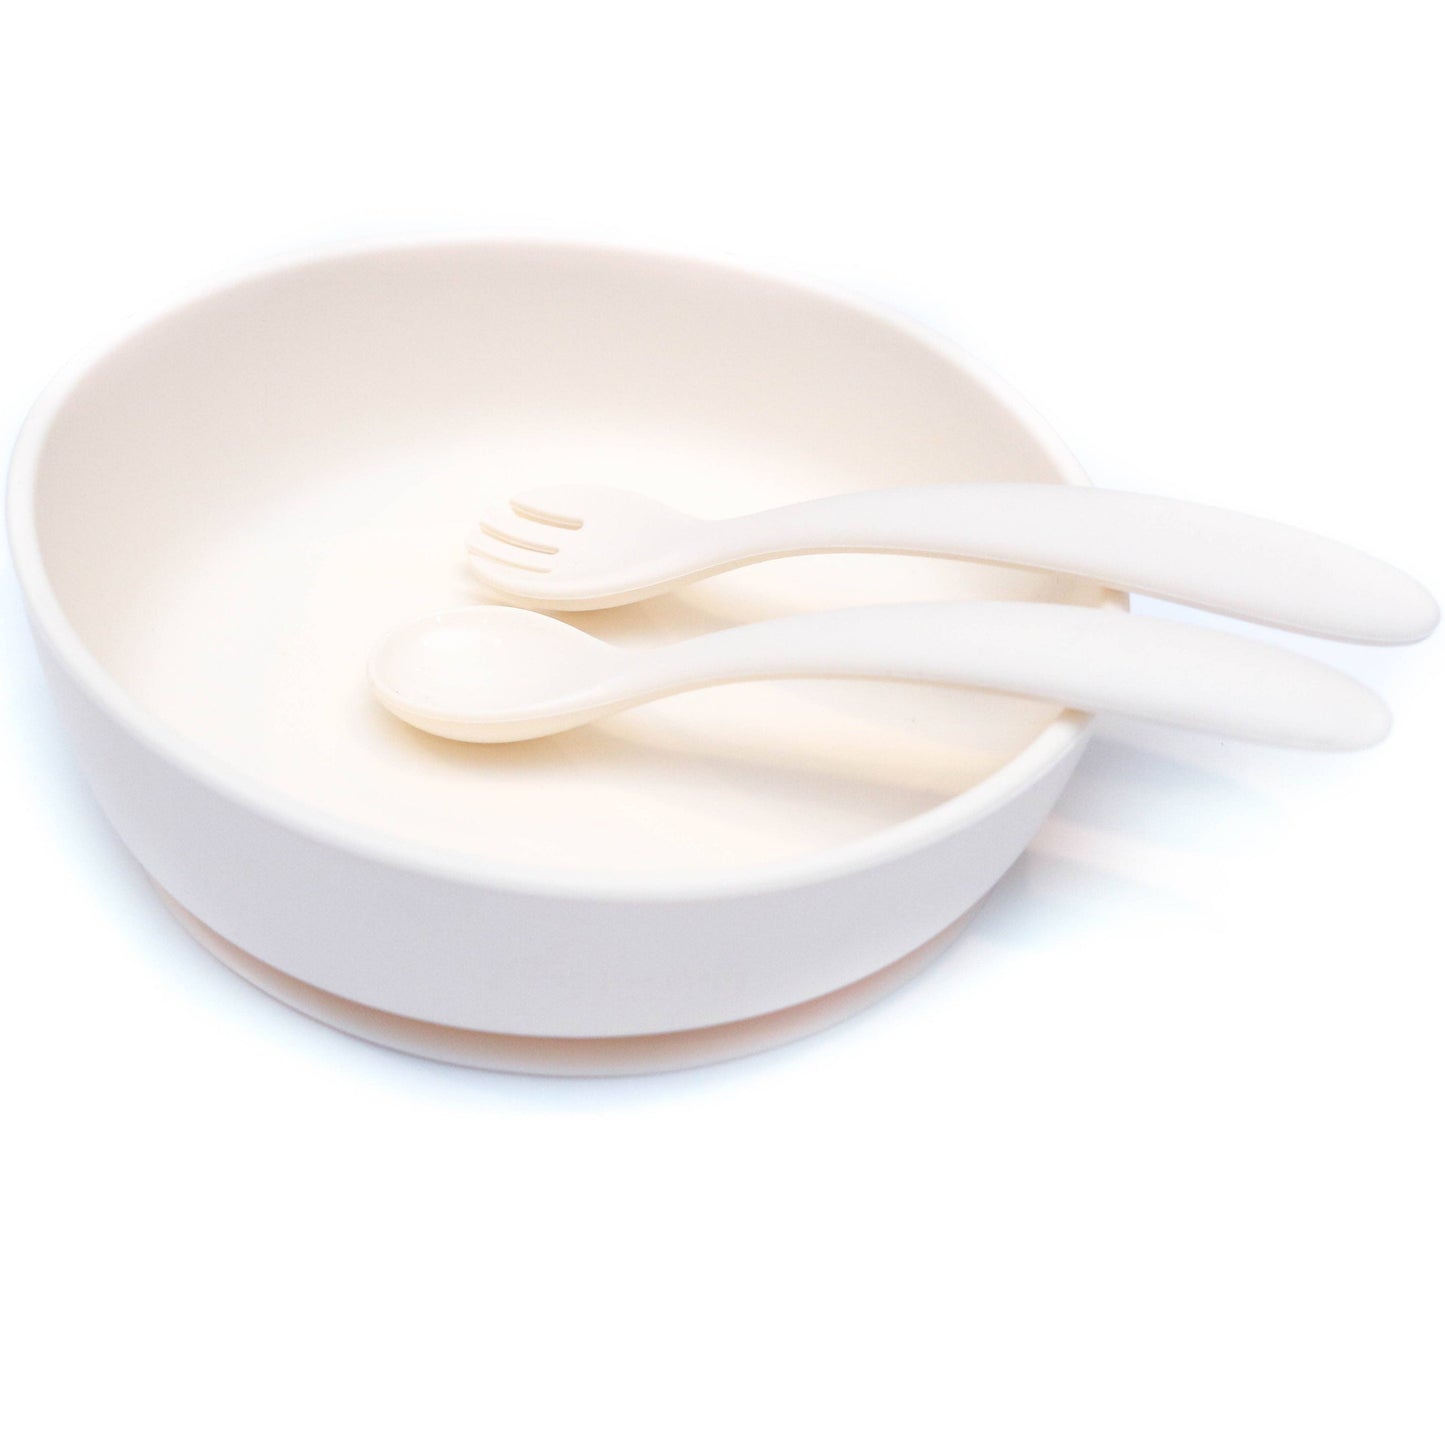 Silicone Bowl & Utensil Set - Multiple Colors Available